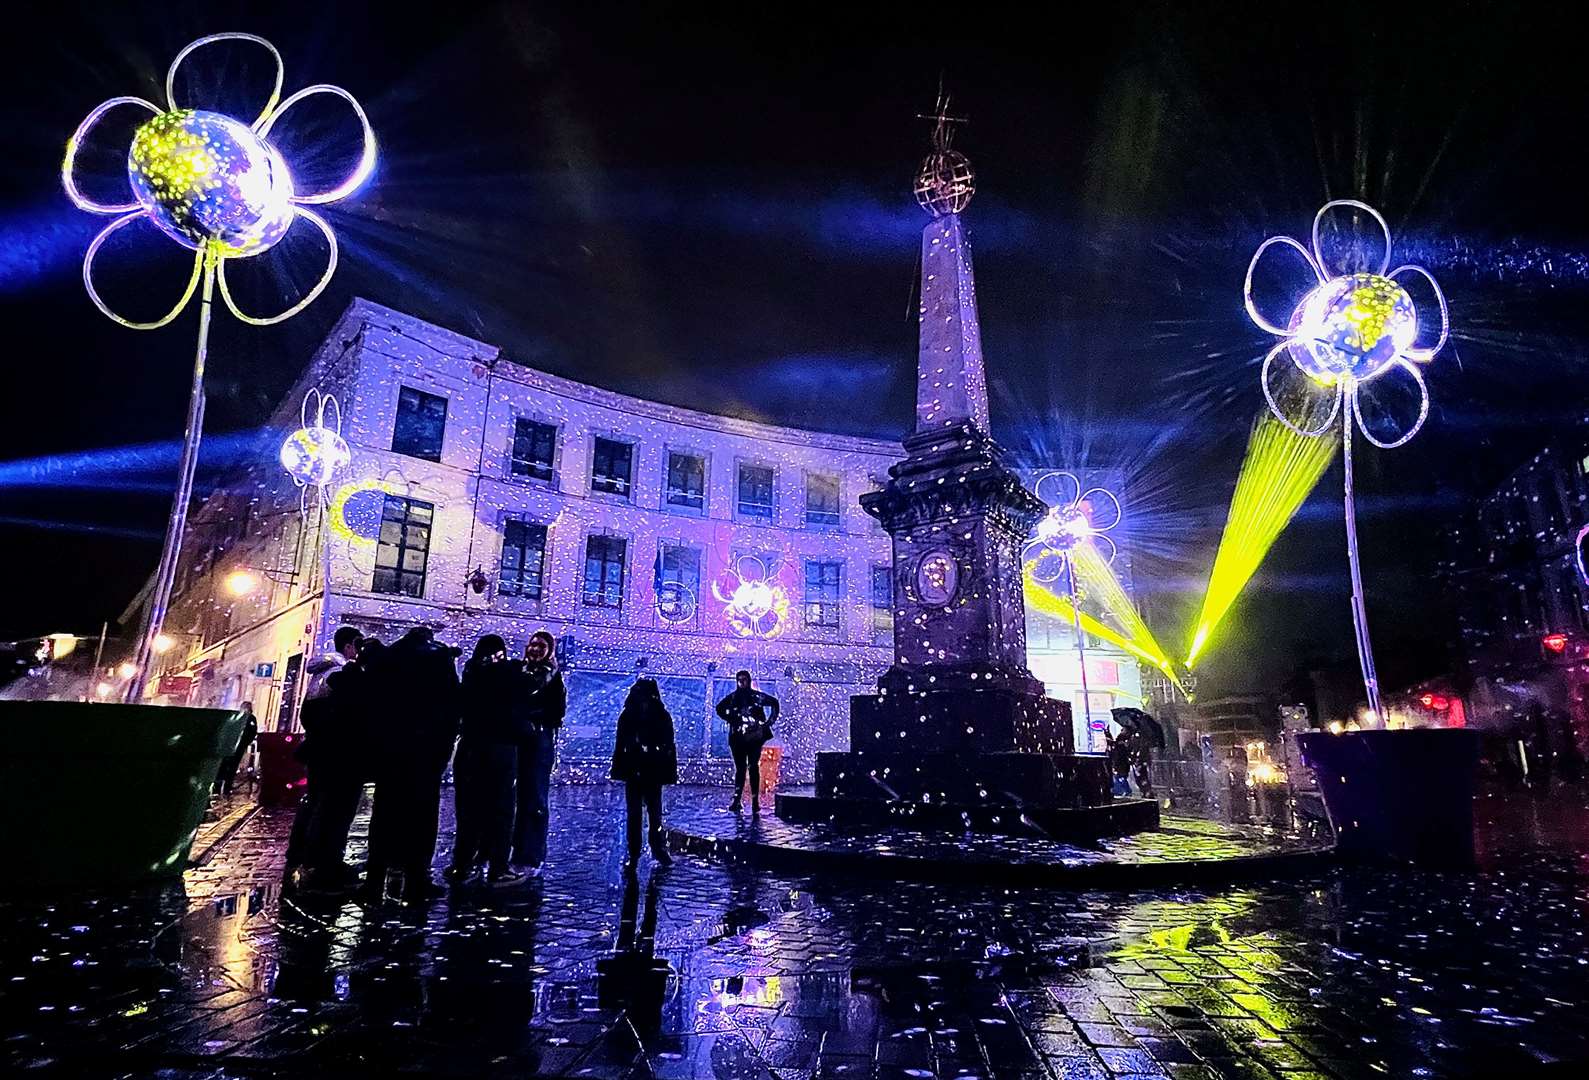 The city of Mons has been illuminated this winter for a brand new light festival. Picture: Barry Goodwin